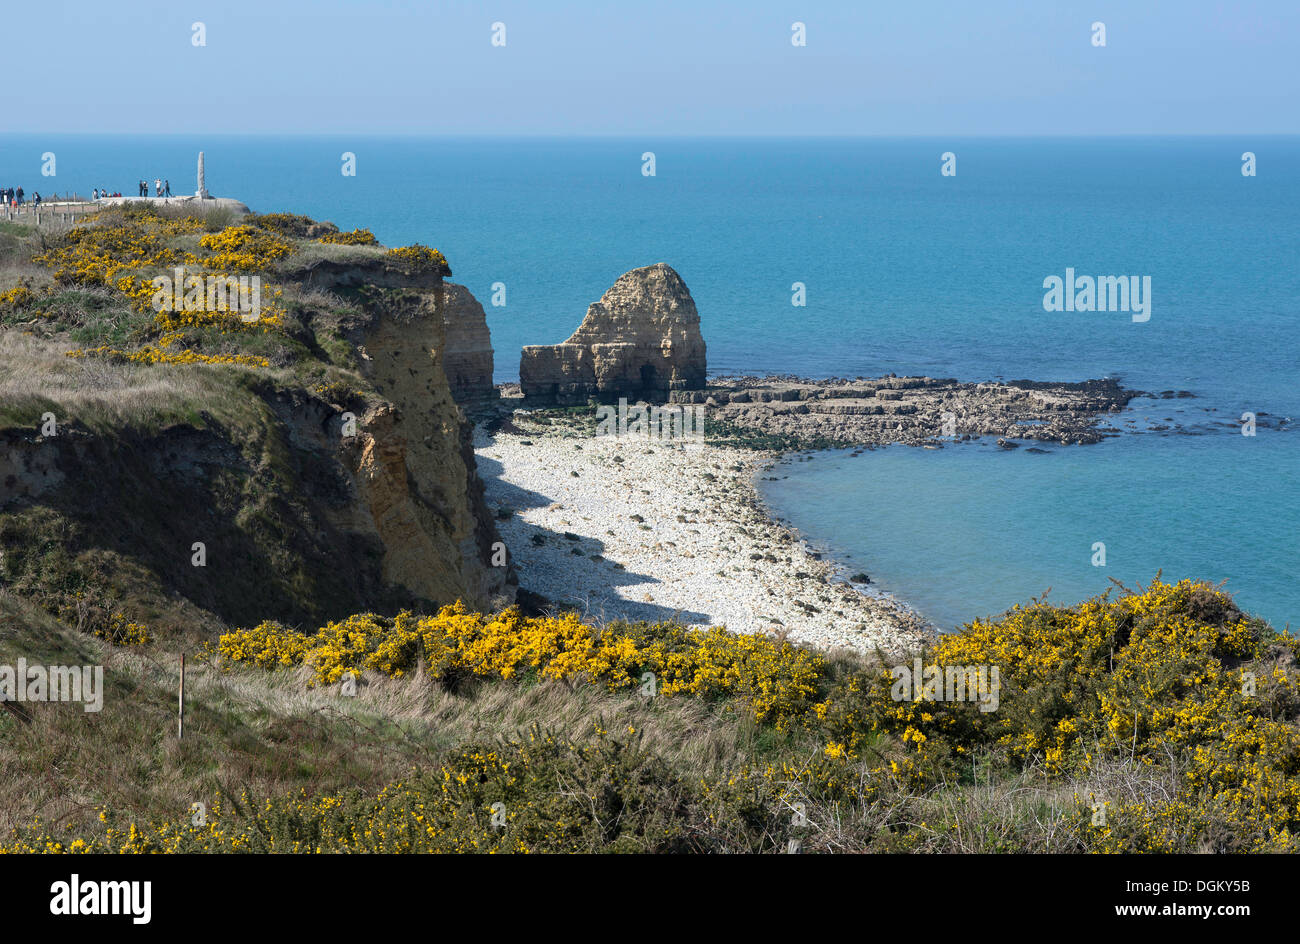 Coast with the Pointe du Hoc memorial, Omaha Beach, Lower Normandy, France, Europe Stock Photo